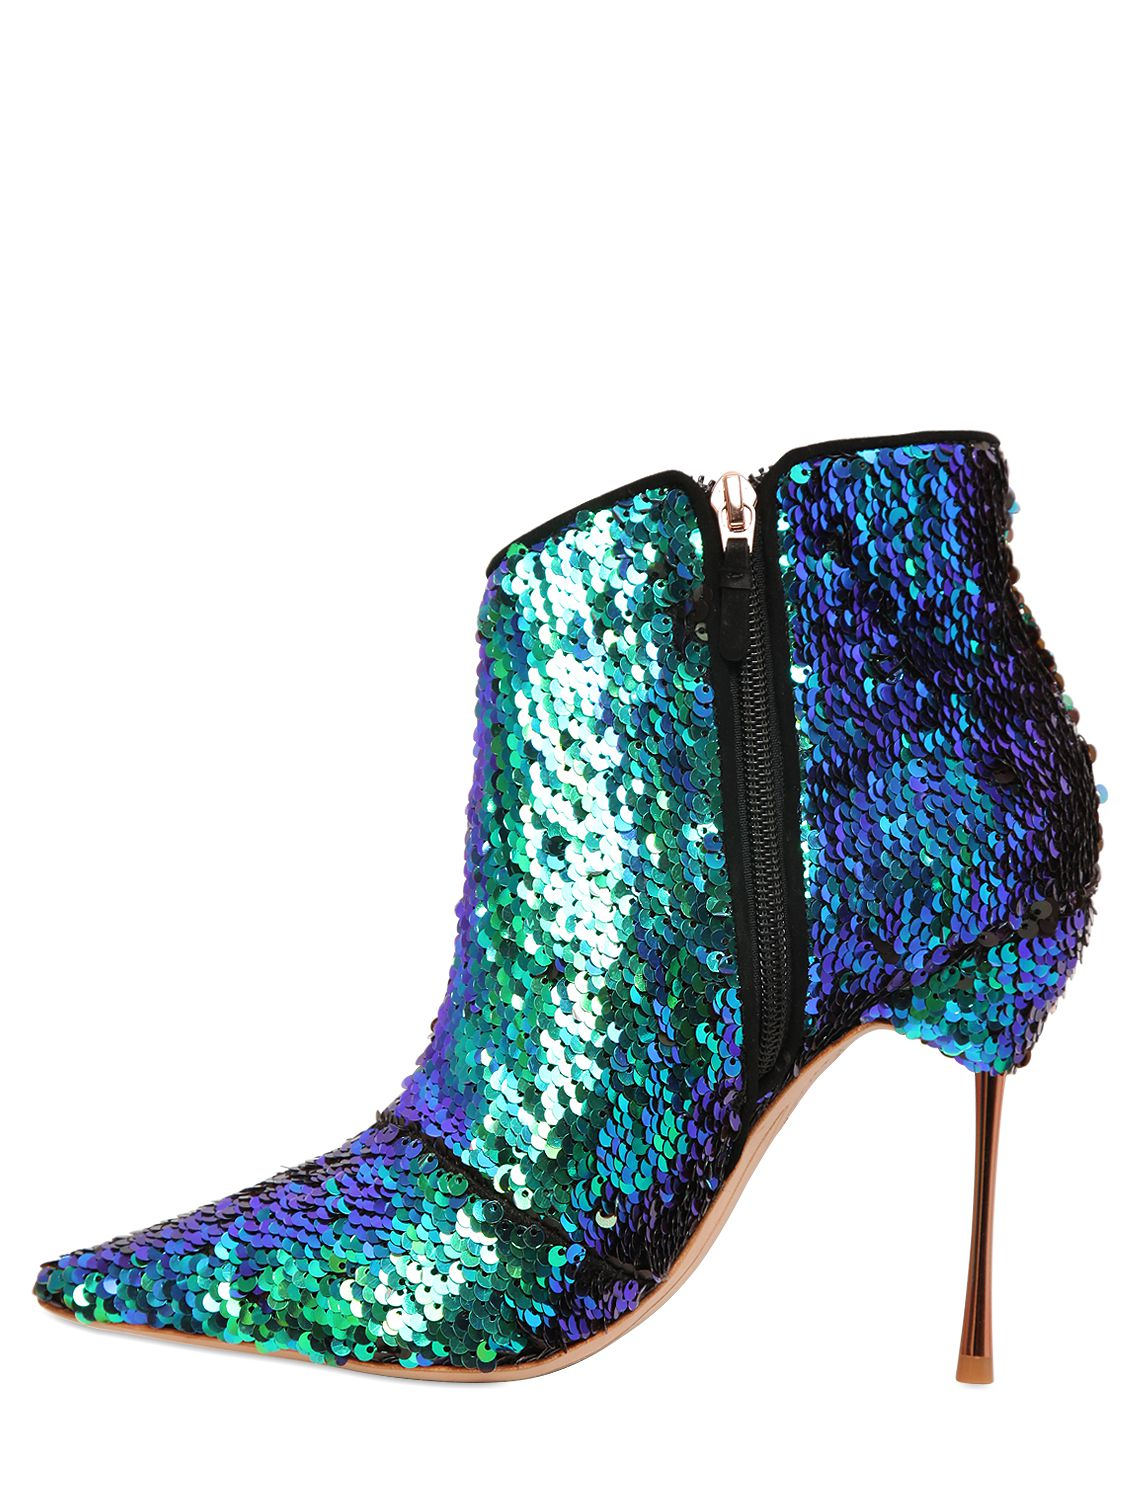 Lyst - Sophia Webster Ankle Boots in Blue